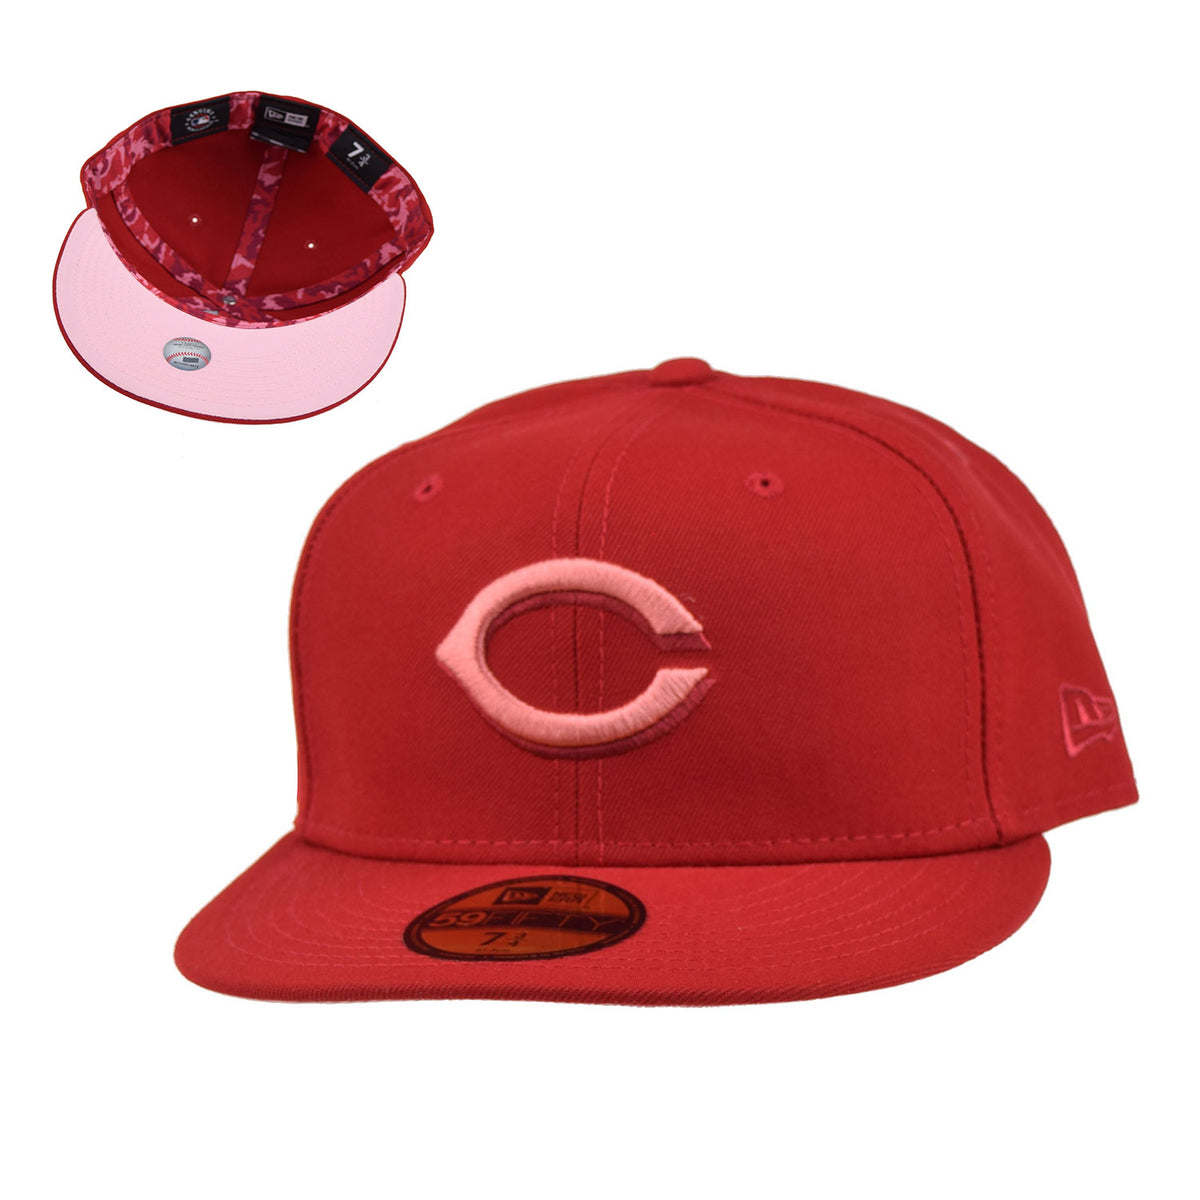 New Era Cincinnati Reds 59FIFTY Authentic Collection Hat Black/Red 7 7/8